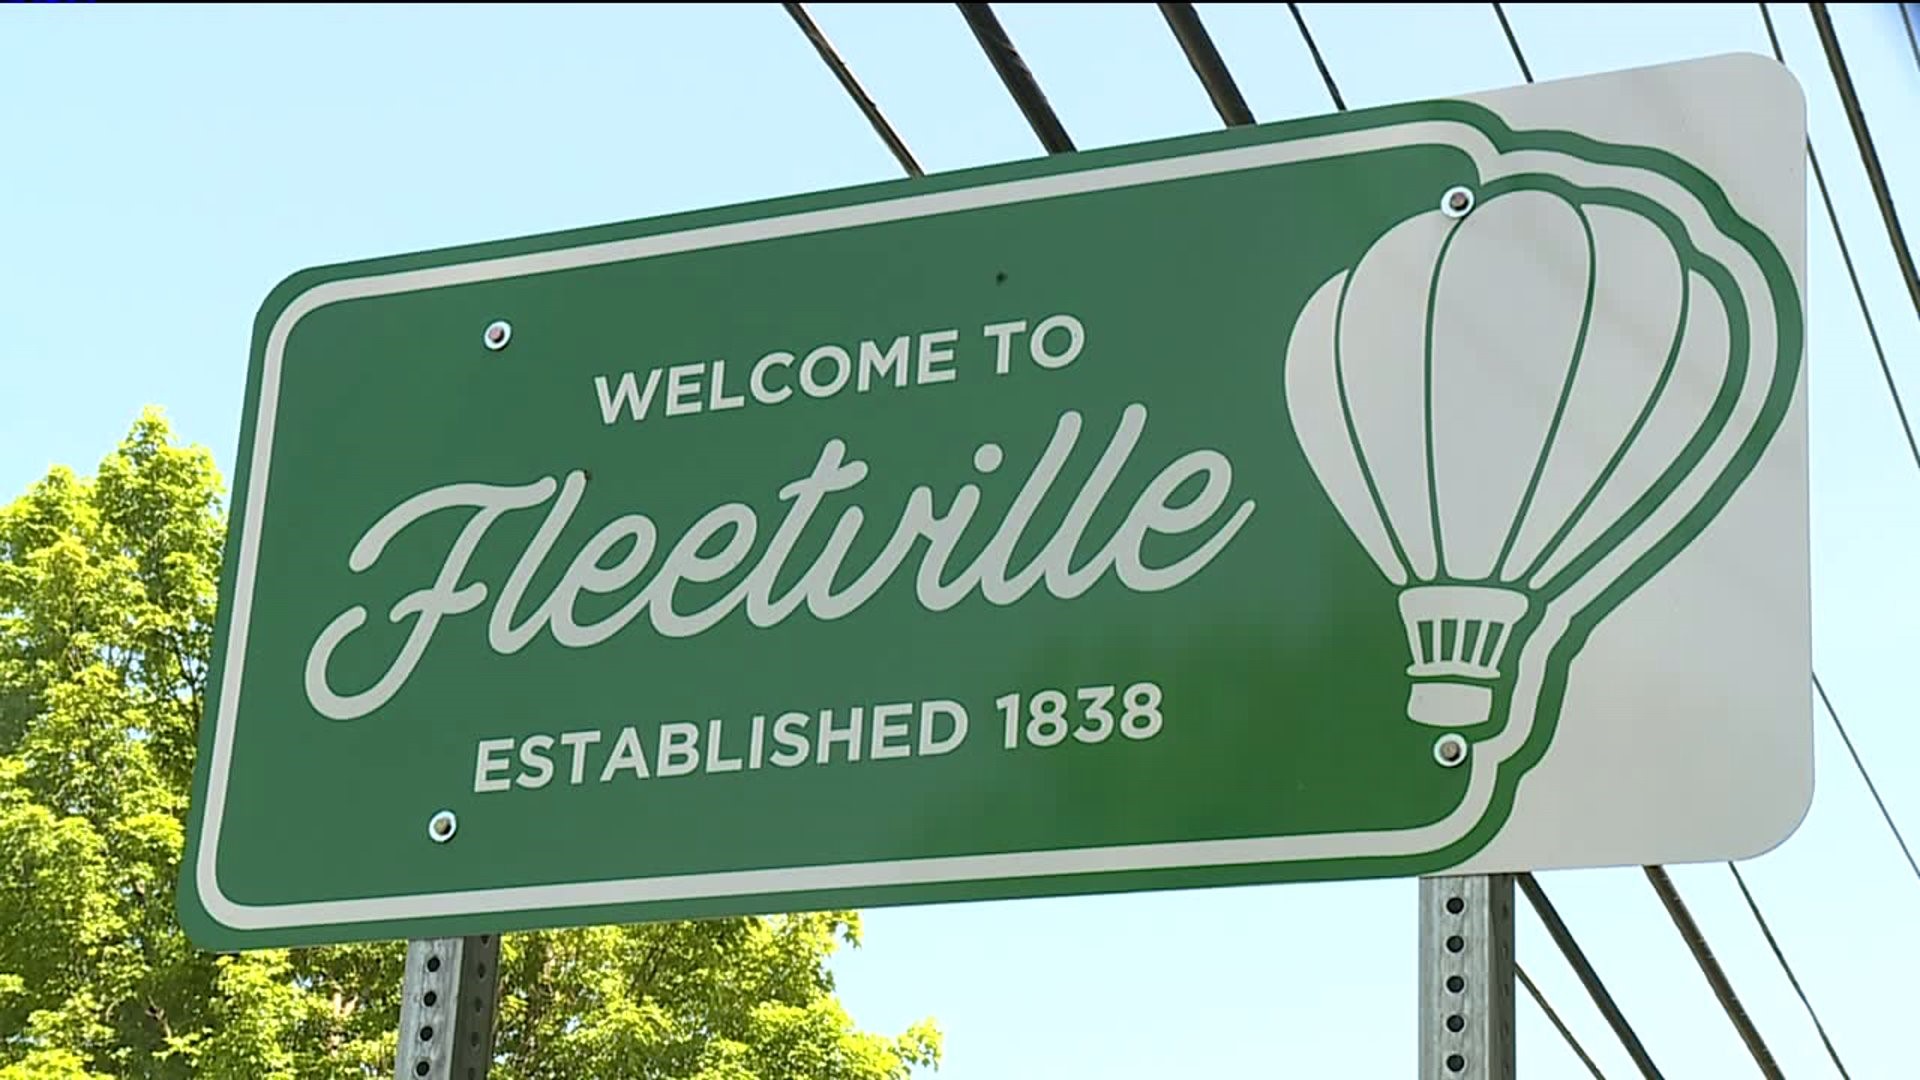 'Welcome to Fleetville' Signs Added Thanks to Young Girl's Efforts